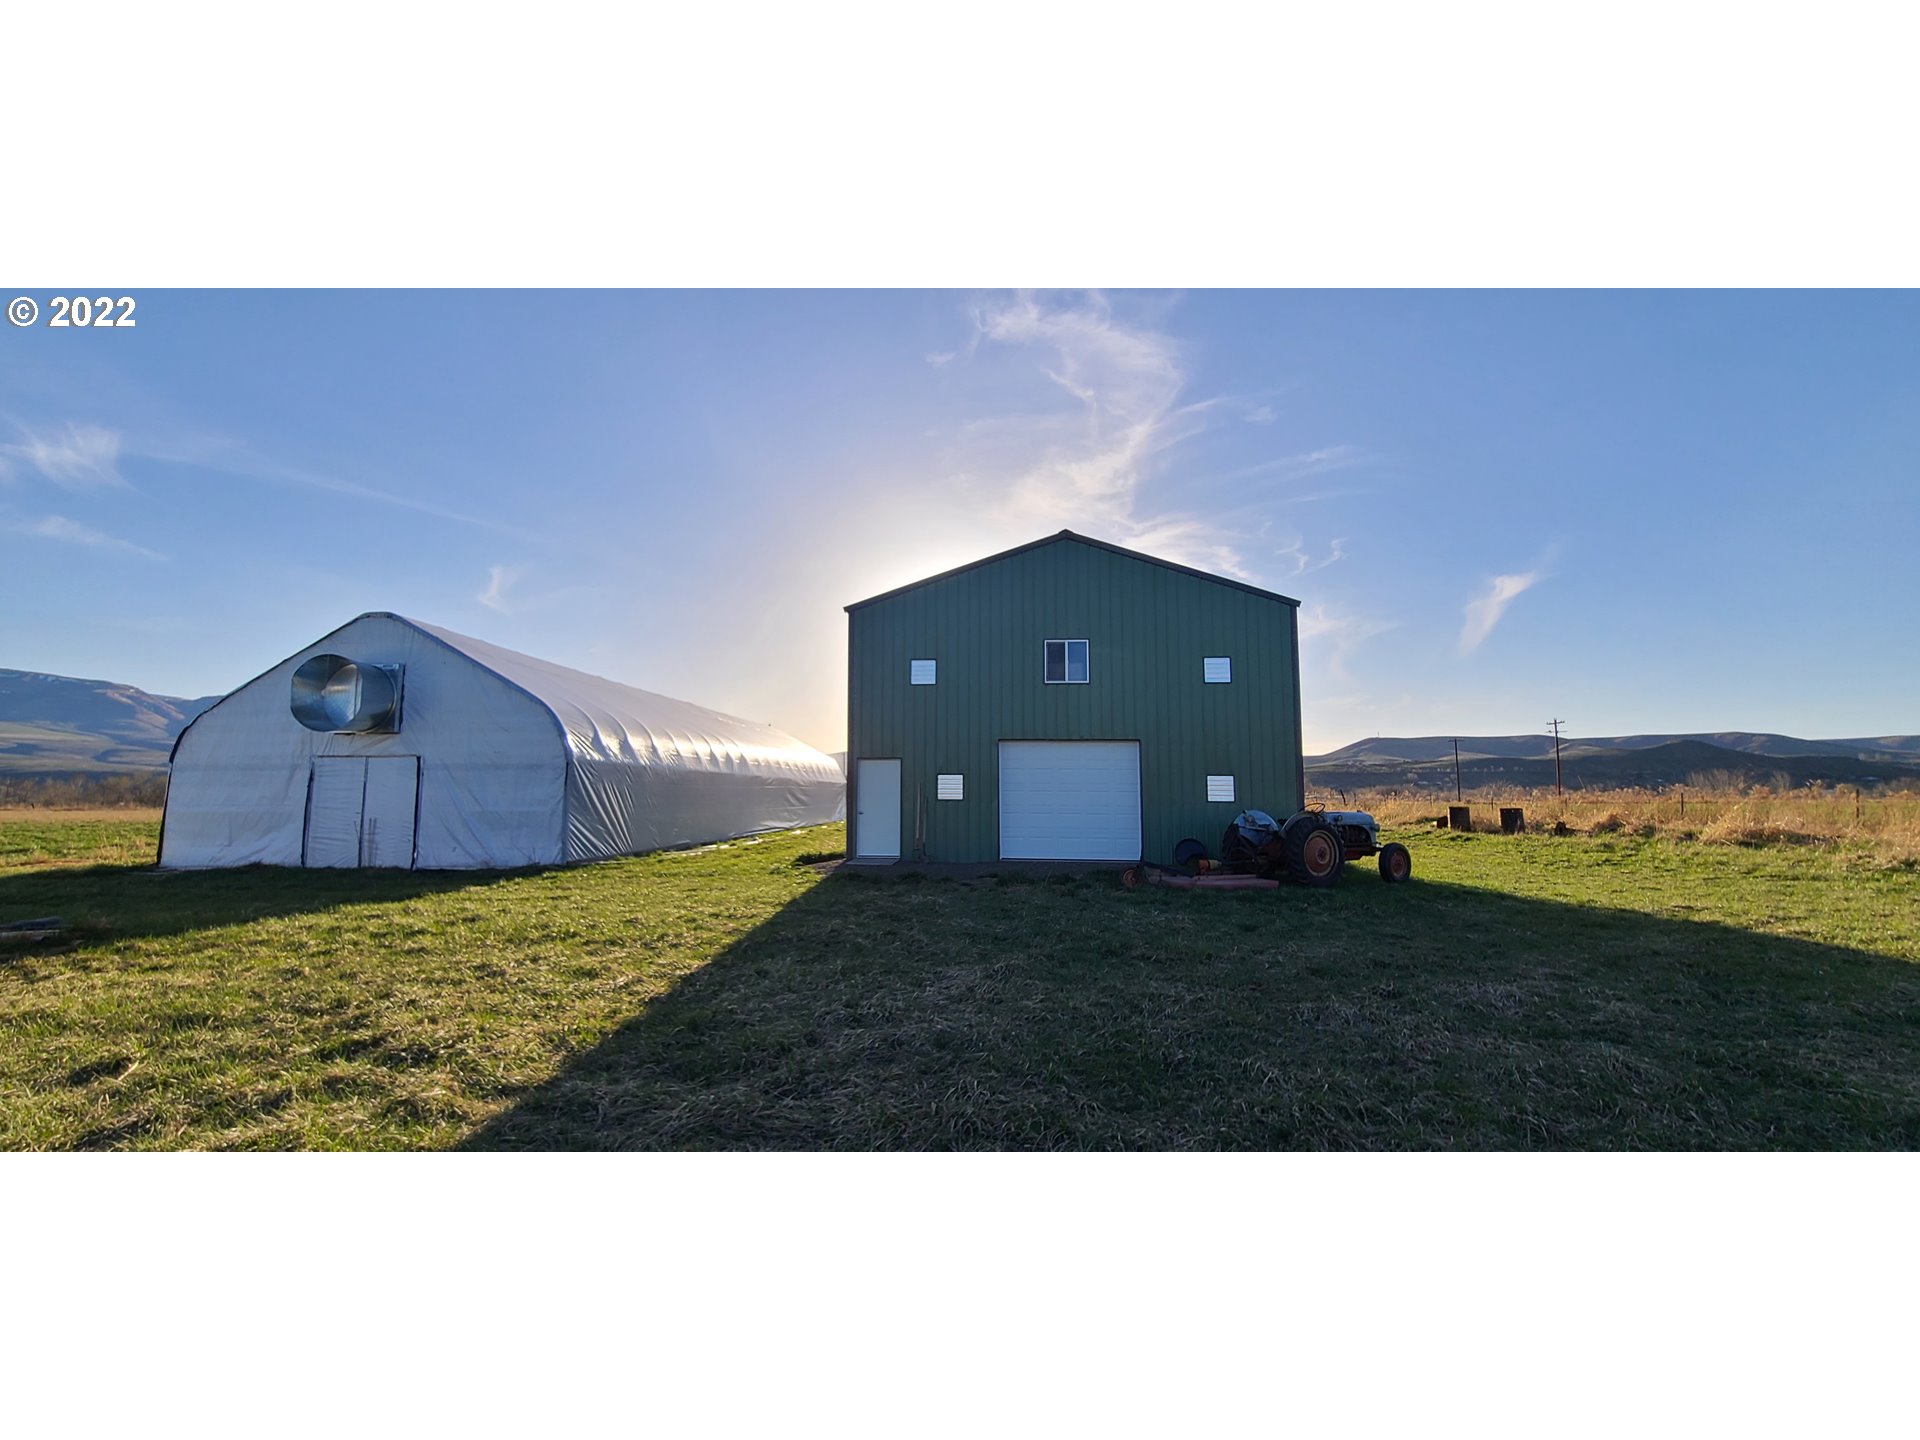 Rare 5 acre+/-irrigated buildable acreage outside of Richland w/ 30x36 two story shop with 10' over hang for covered RV parking. 100 amp elect service.  Electric installed in fully insulated shop. 100x30 vented green house with clear & shade covers. Panorama views in the heart of recreation paradise. Convert 2nd story into living quarters and have shop/garage below or have awesome shop and rec. vehicle storage. Or build. Come and enjoy the abundance our community has to offer.